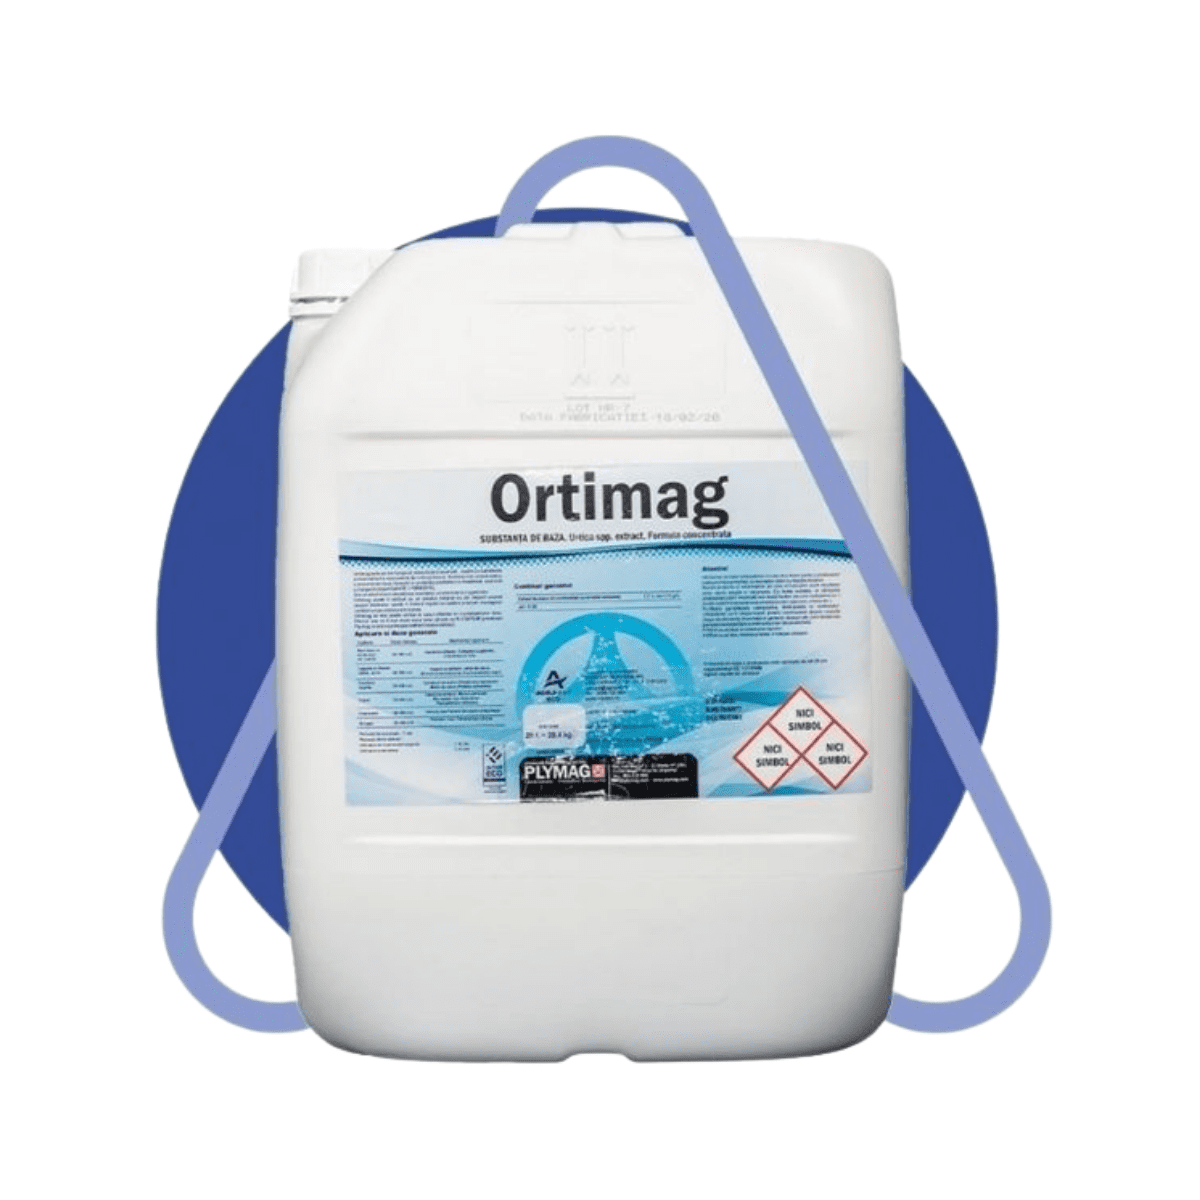 Bioinsecticide - Insecticid si acaricid ecologic Ortimag 20 L, hectarul.ro